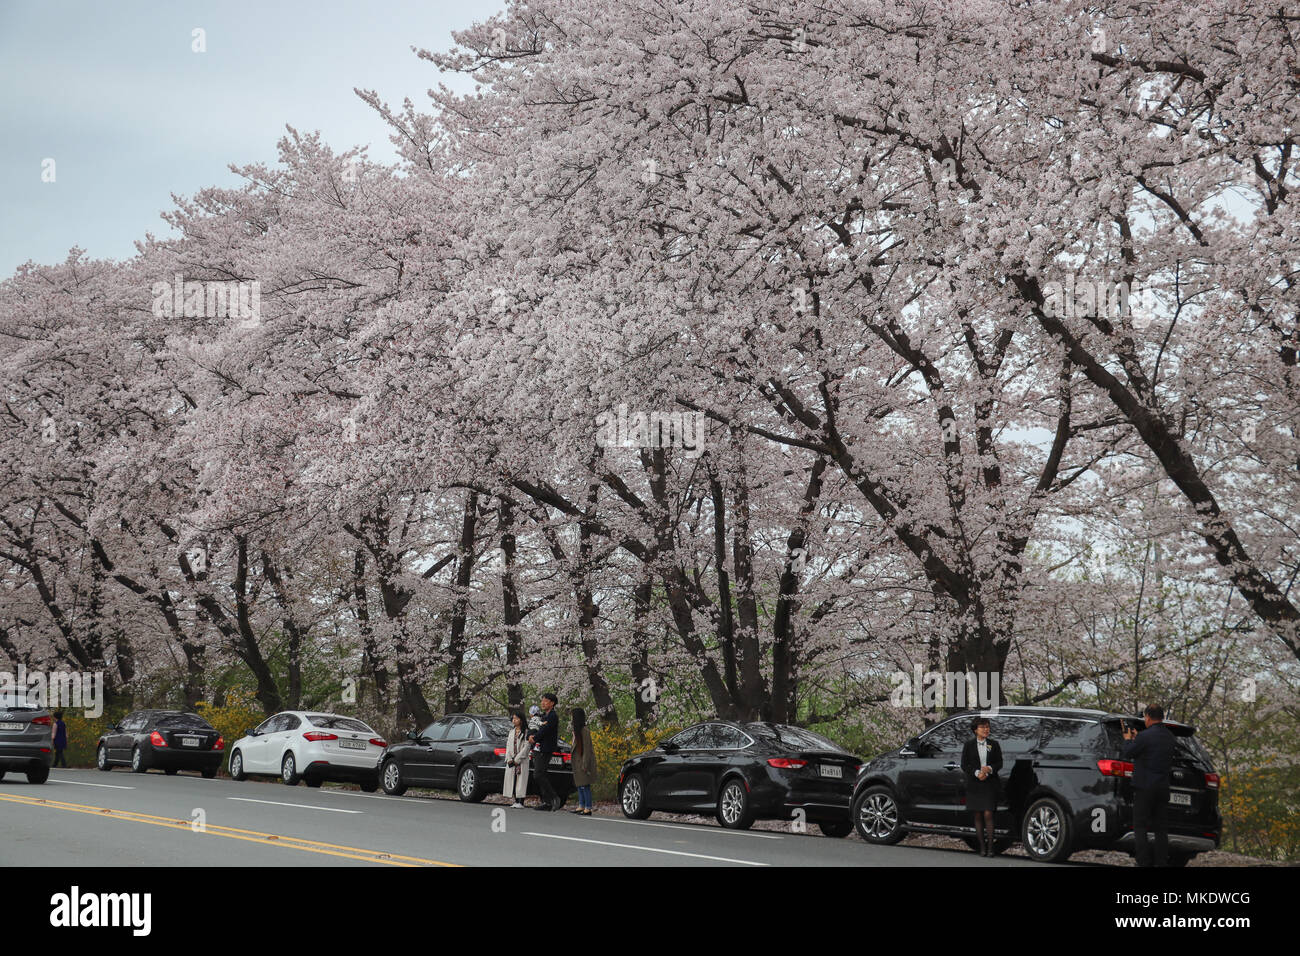 Huge mature cherry trees in full bloom along a road in Gyeongju, South Korea, have attracted many cars to stop to view the beautiful pink blossoms. Stock Photo